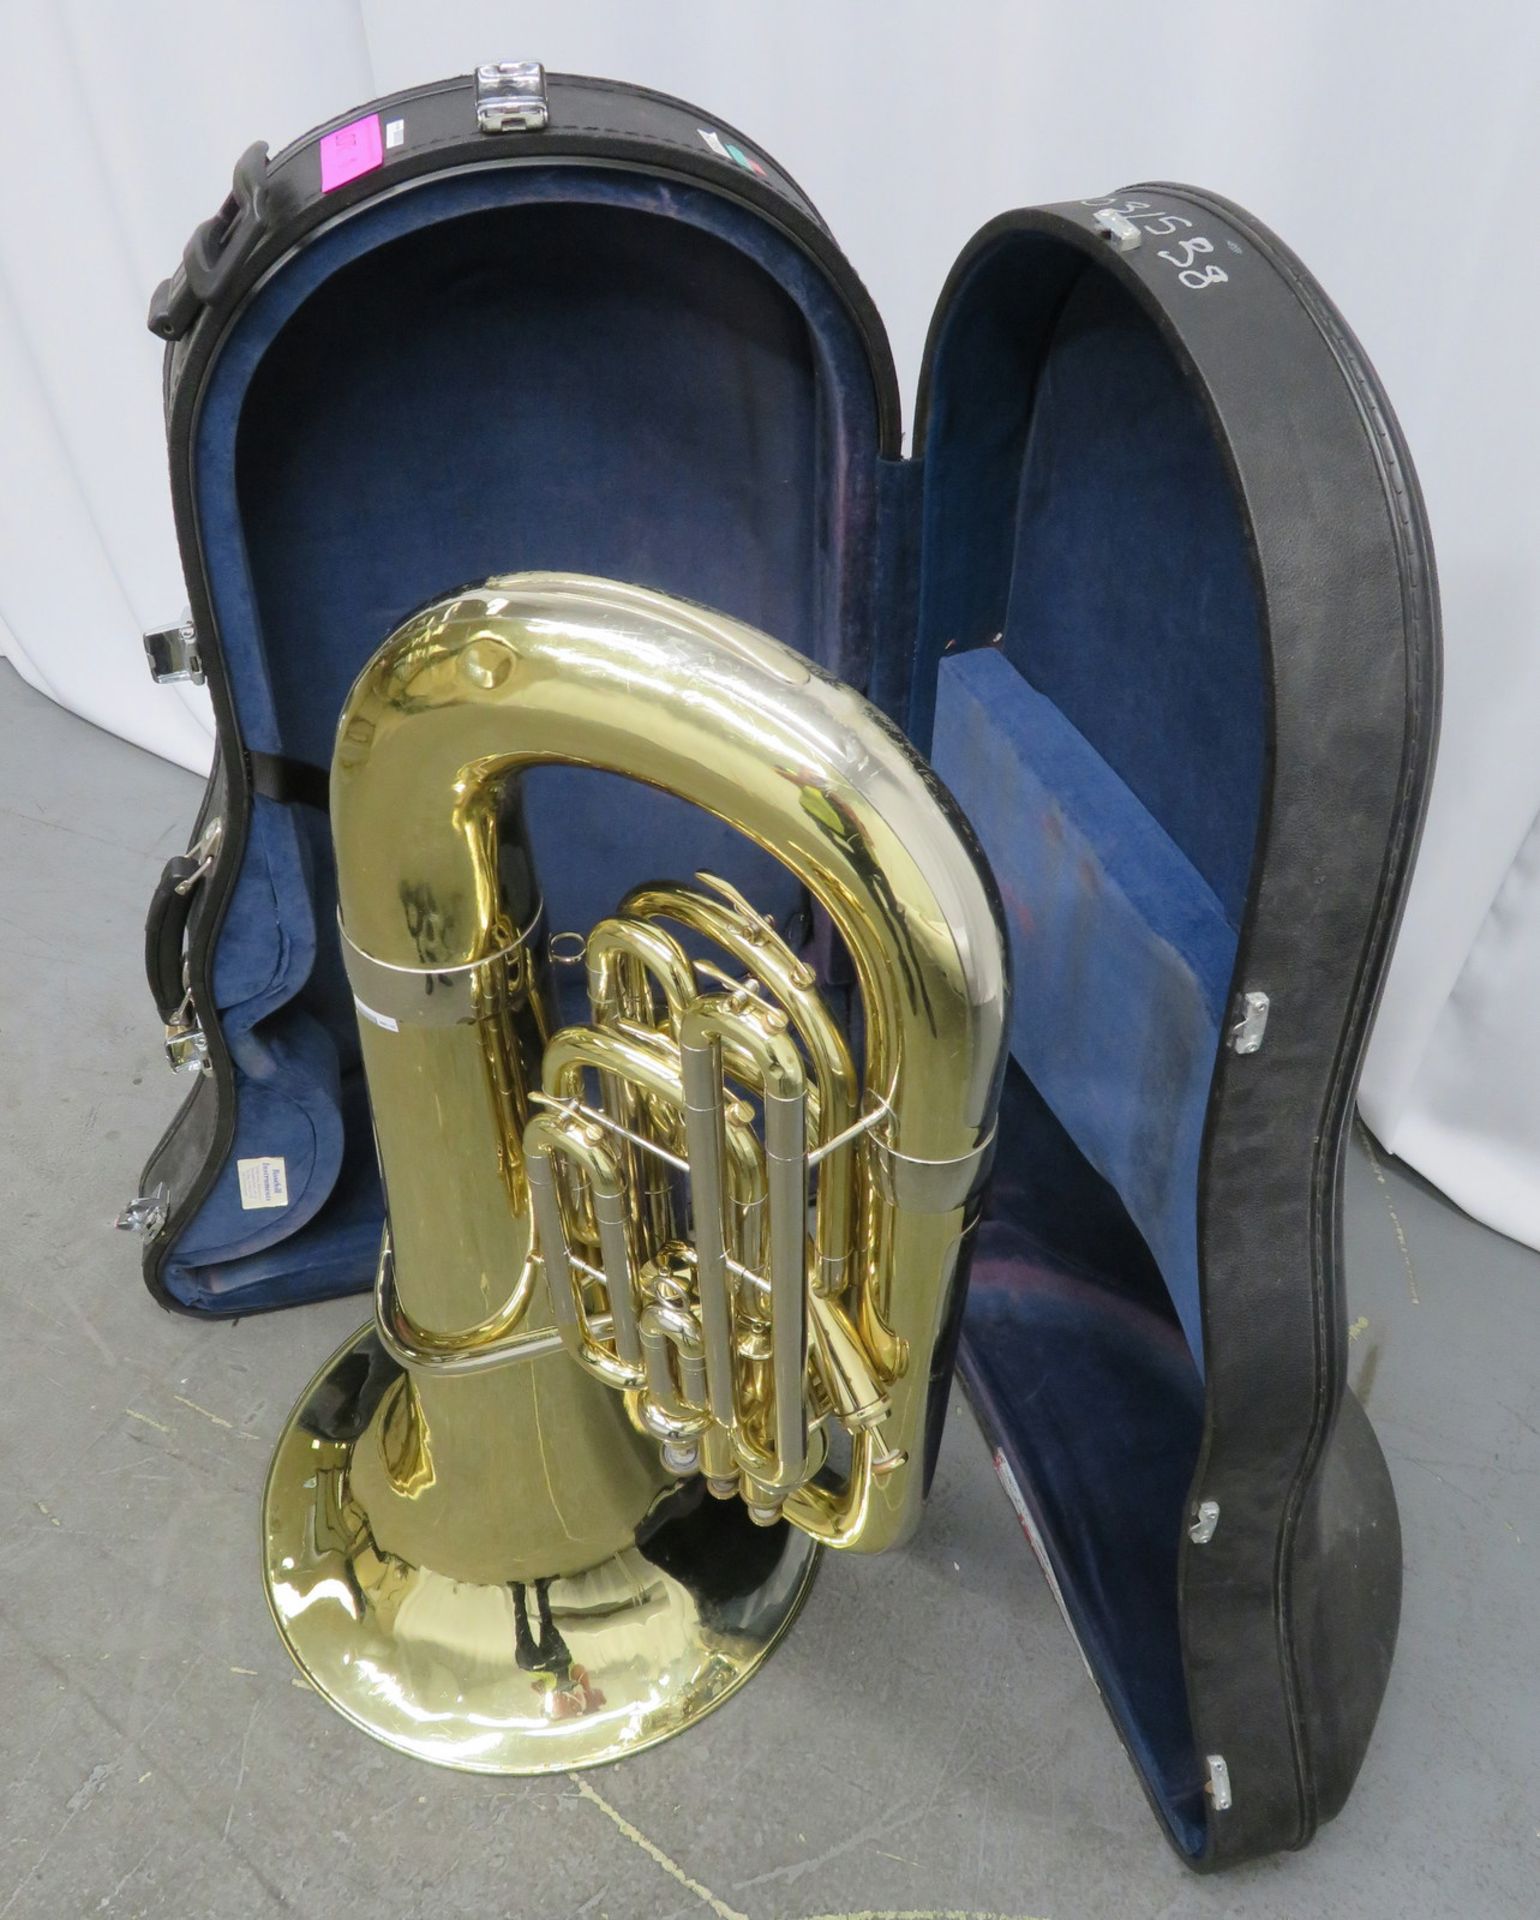 Miraphone Eeb 1261 tuba with case. Serial number: 9031538. - Image 2 of 18